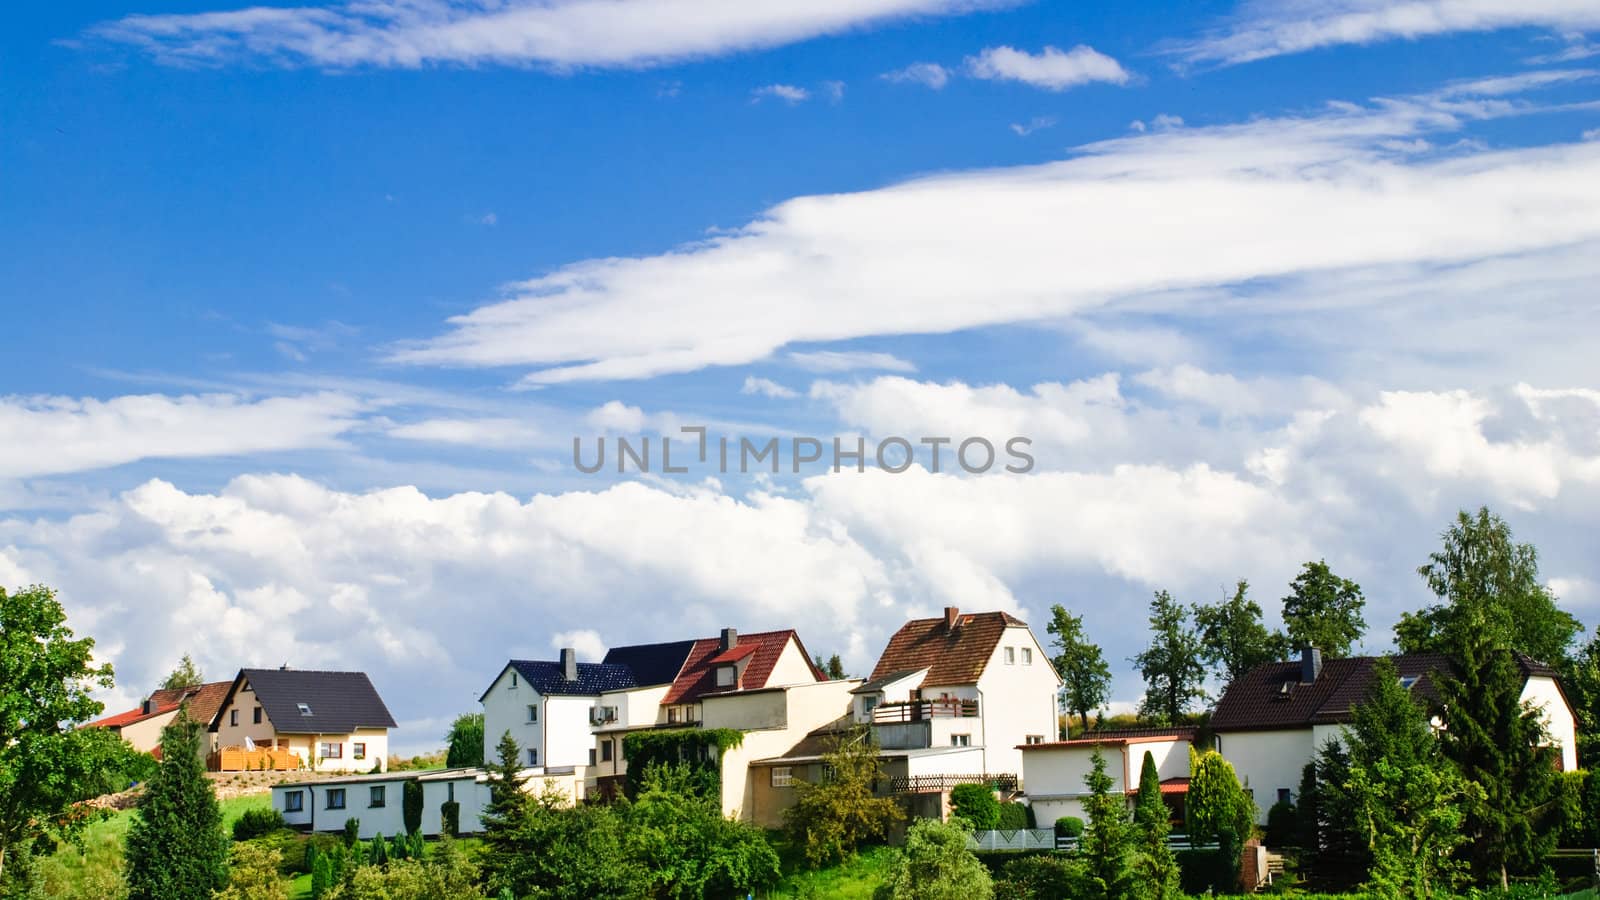 Village against the summer blue sky with white clouds on a green hill